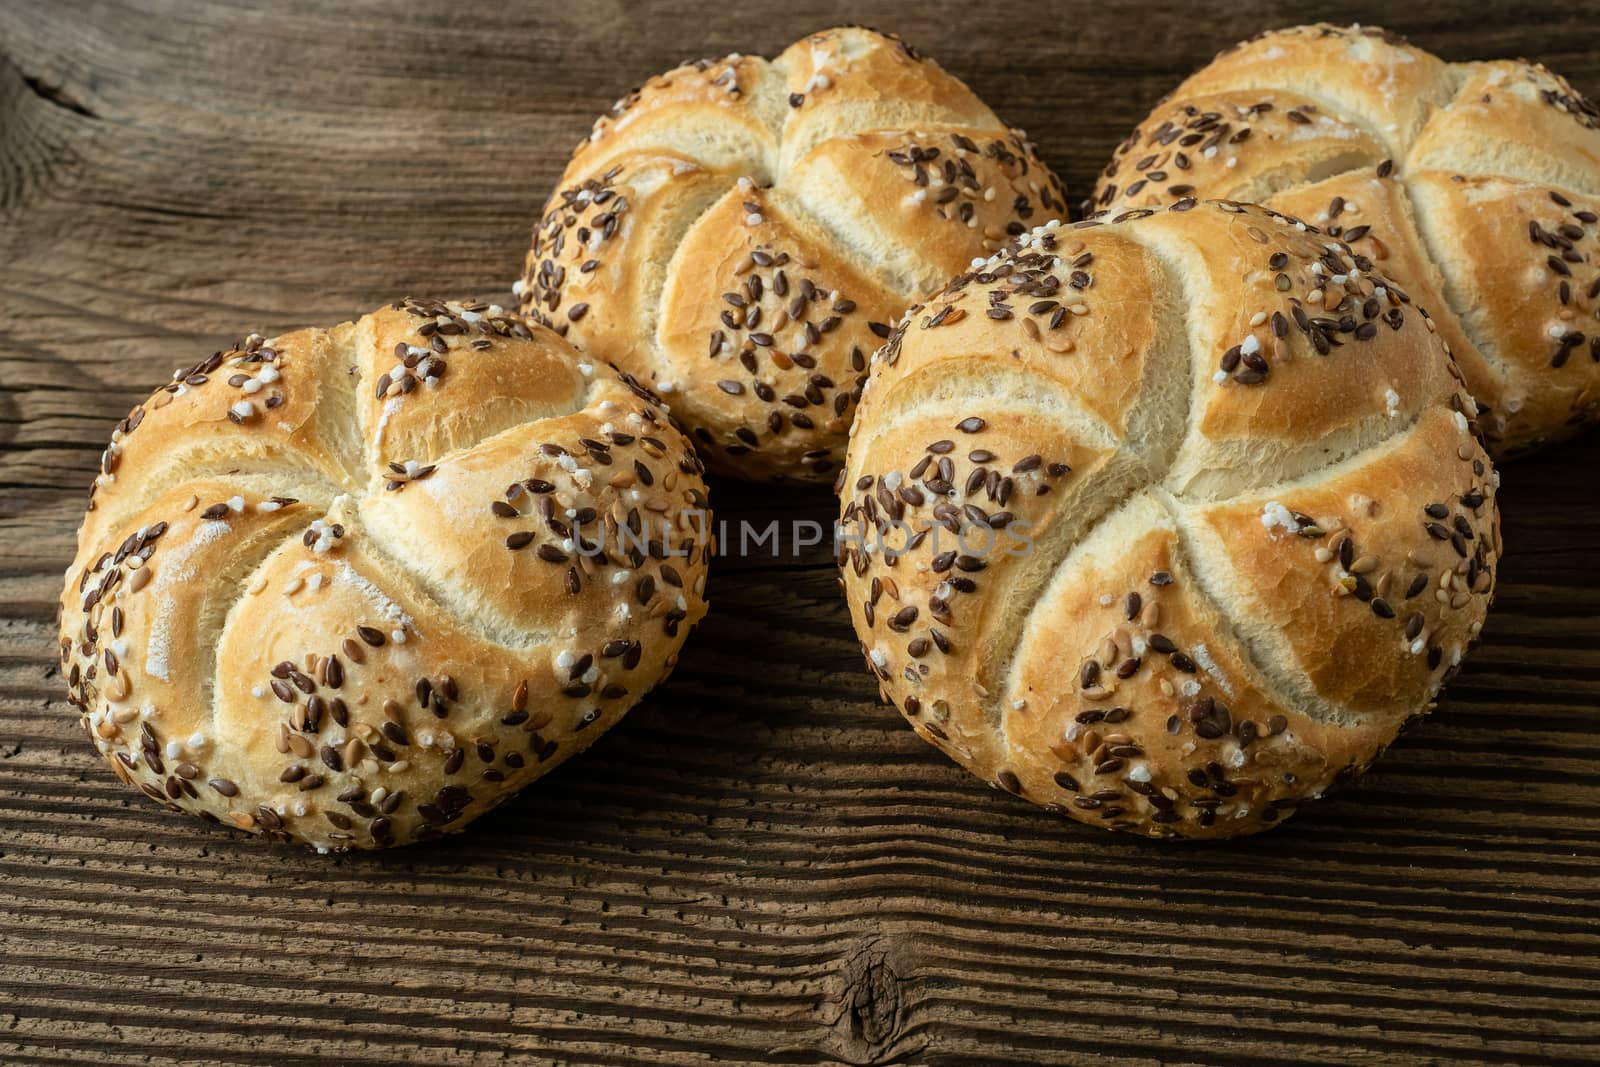 Whole wheat bread on wooden background. Bunch of kaiser rolls with sesame.